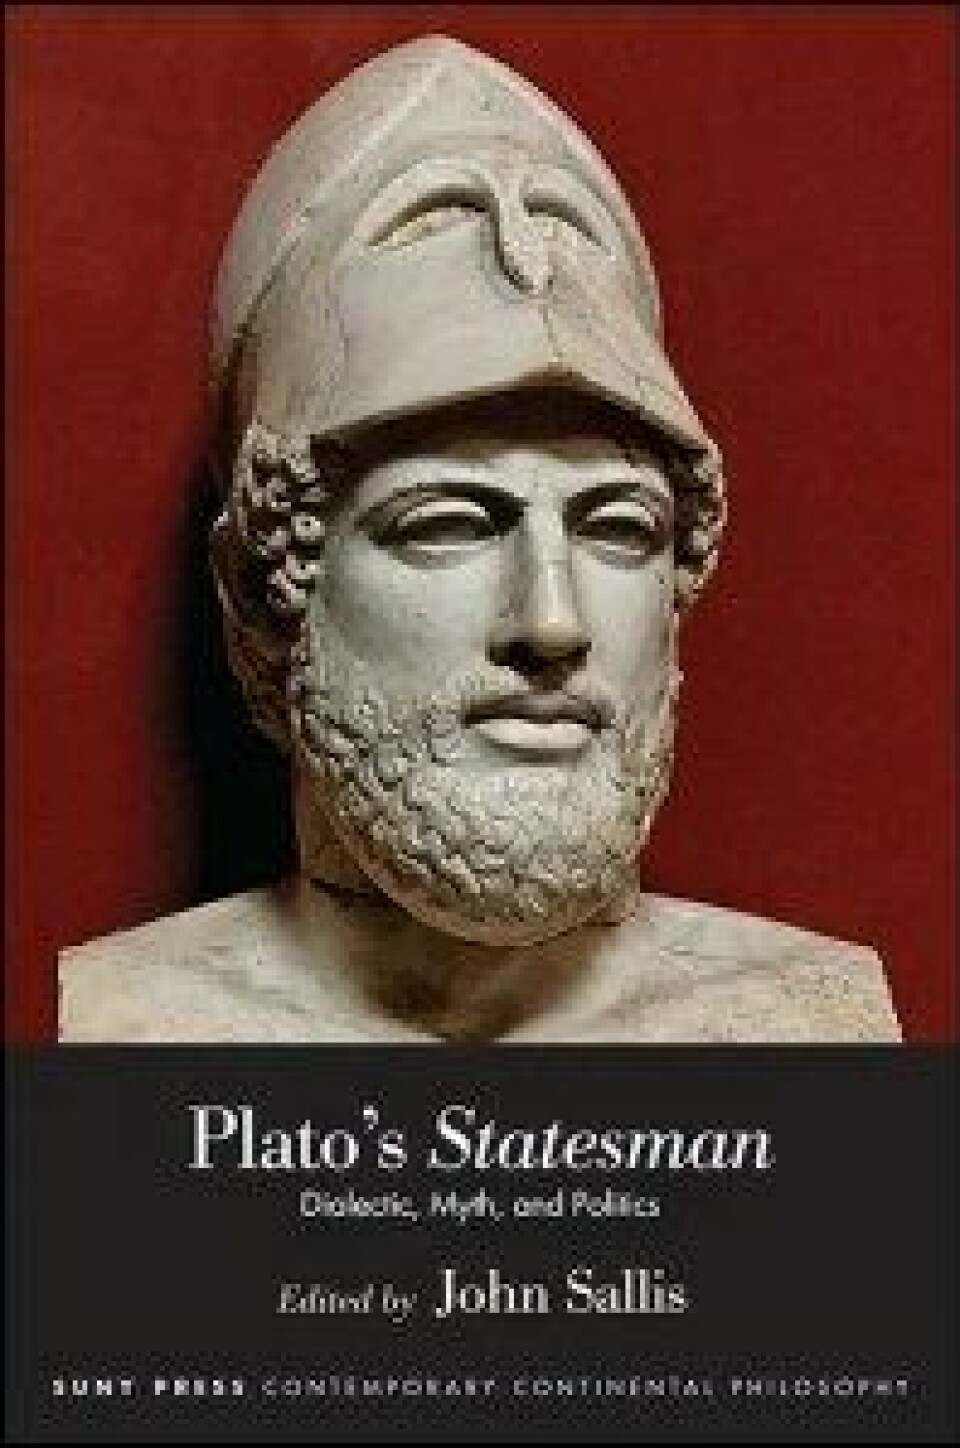 John Sallis (ed.): Plato’s Statesman – Dialectic, Myth, and Politics, SUNY series in Contemporary Continental Philosophy. Albany: State University of New York Press, 2017.